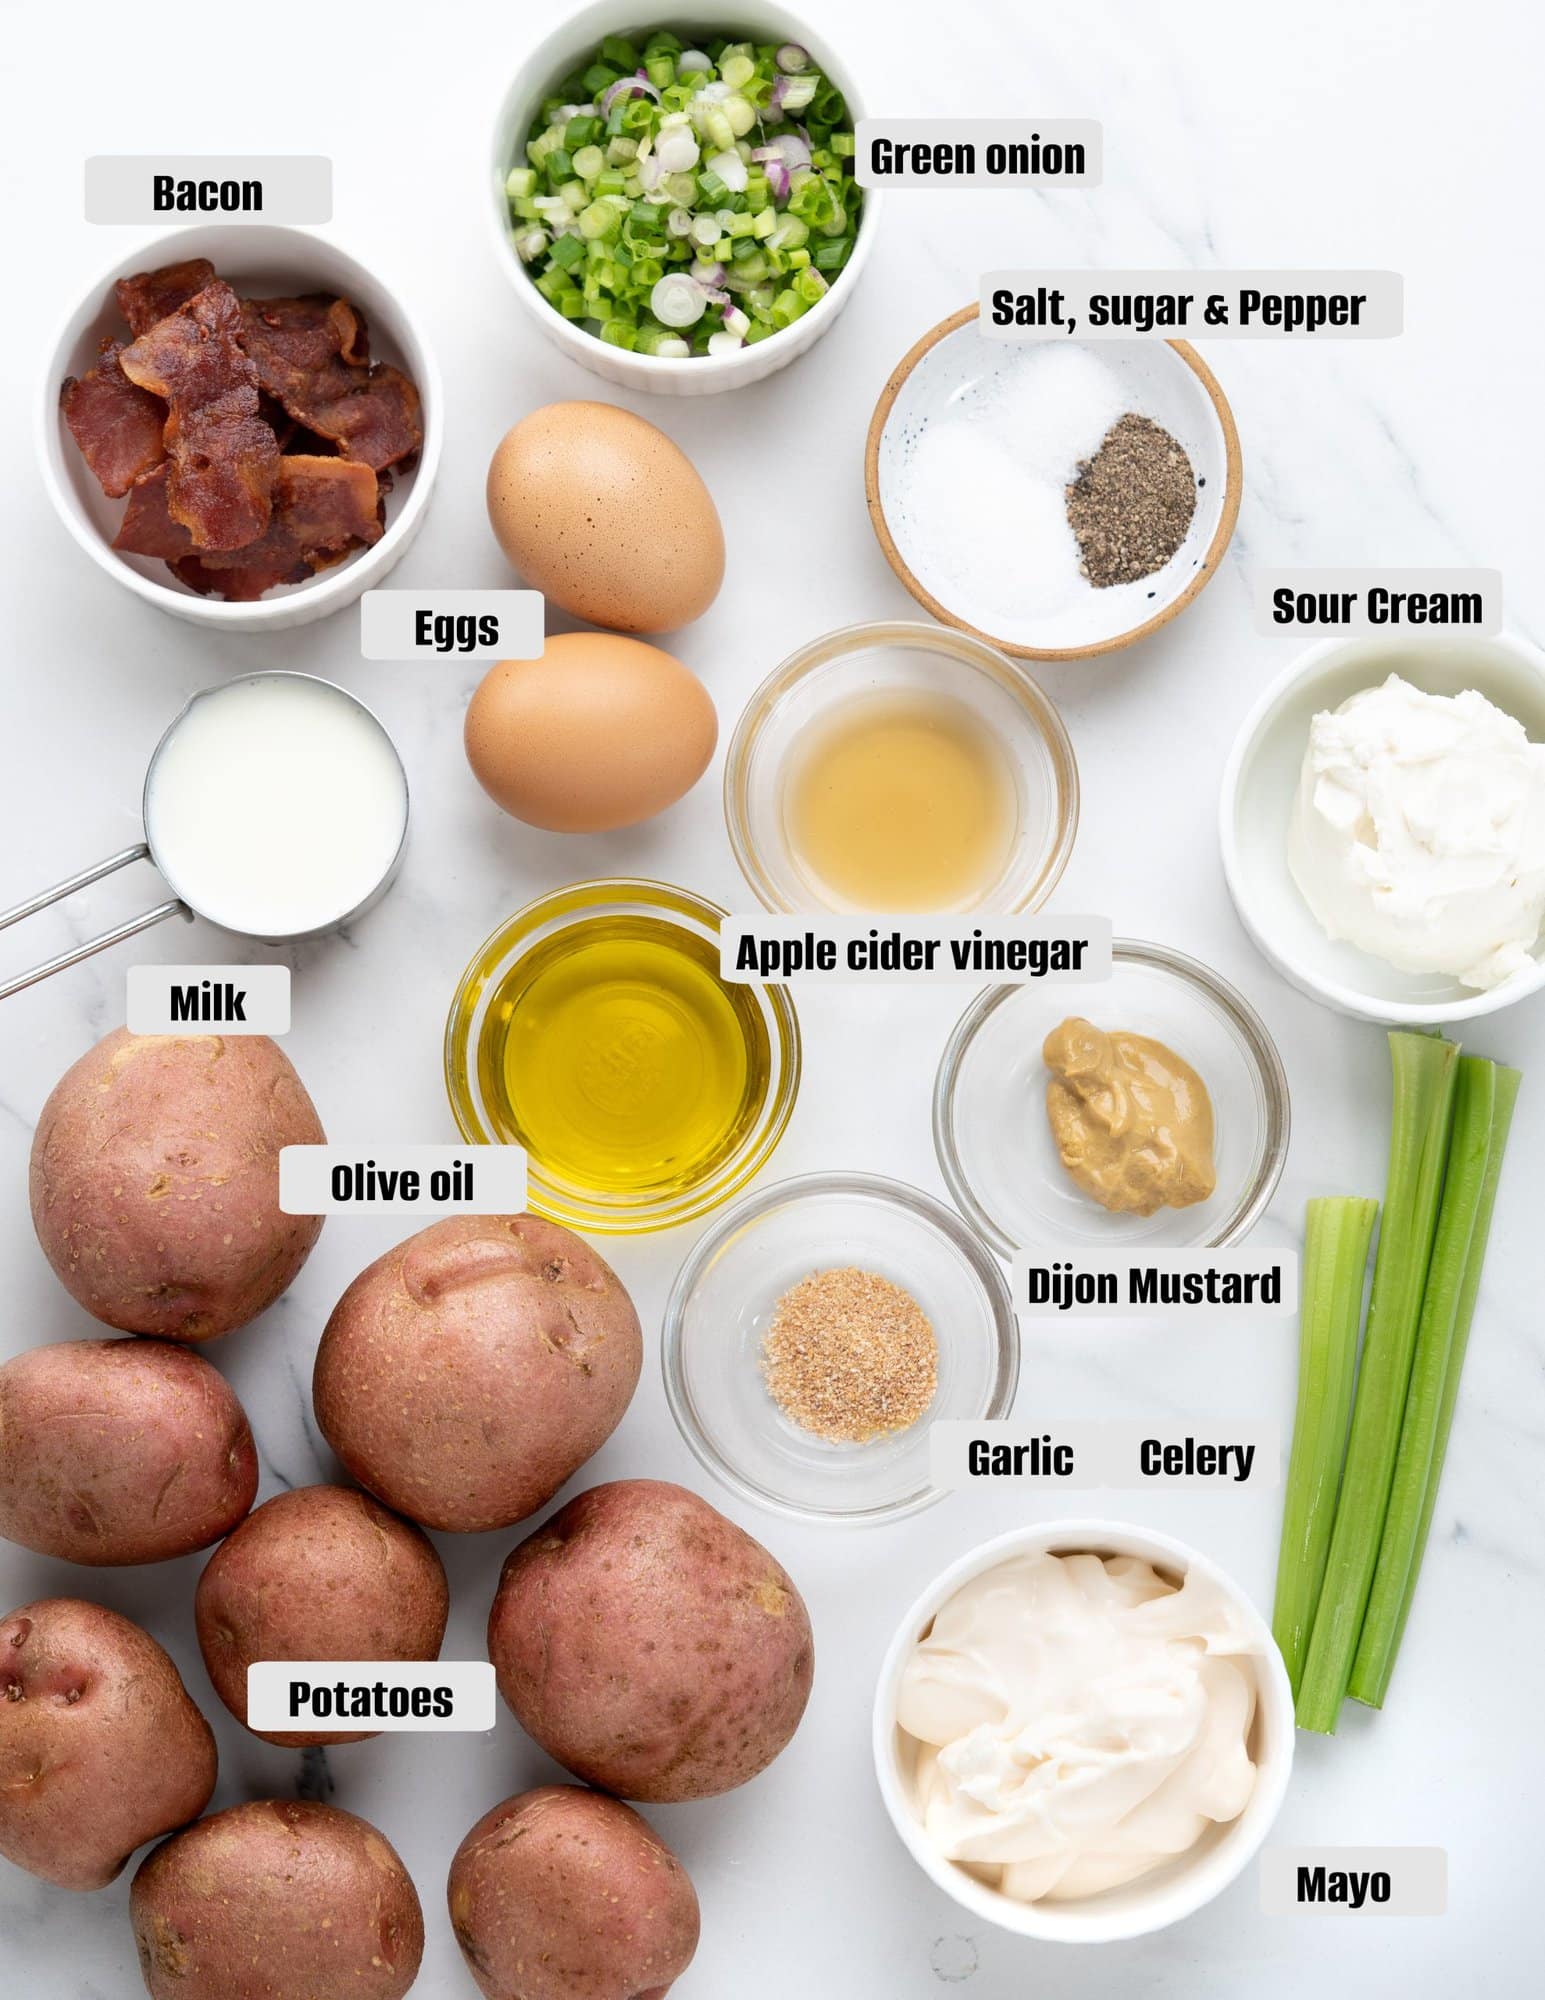 Ingredients for red potato salad